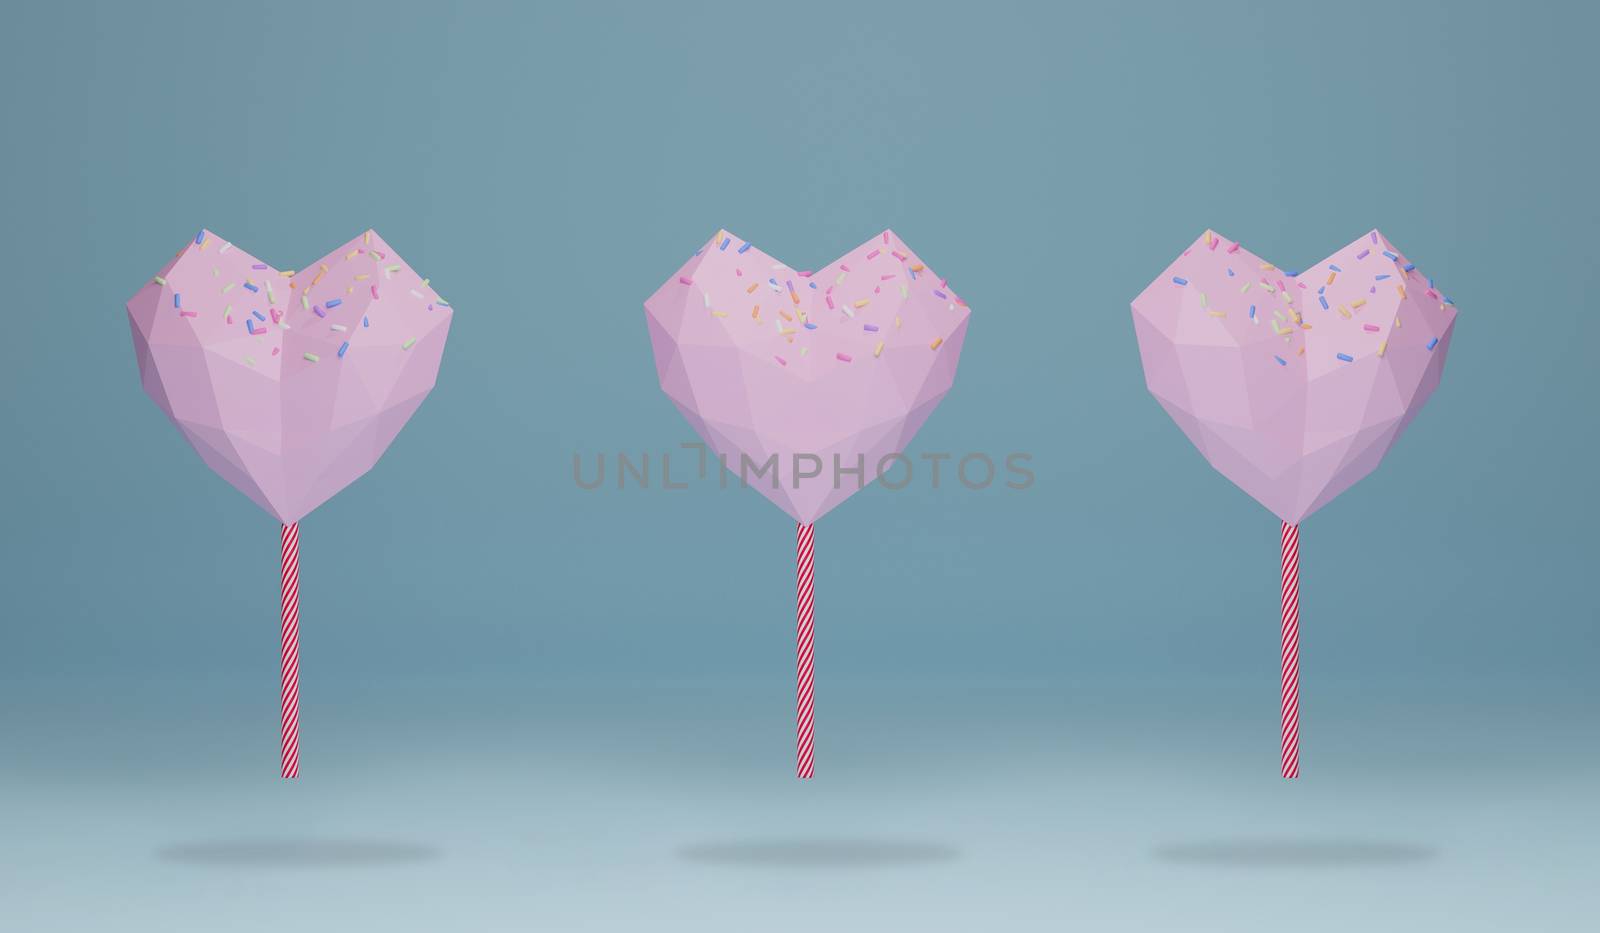 pink heart shape chocolate candy on the end of a stick like lollipop with colorful sprinkles topping. sweet food pattern on blue background, 3d rendering